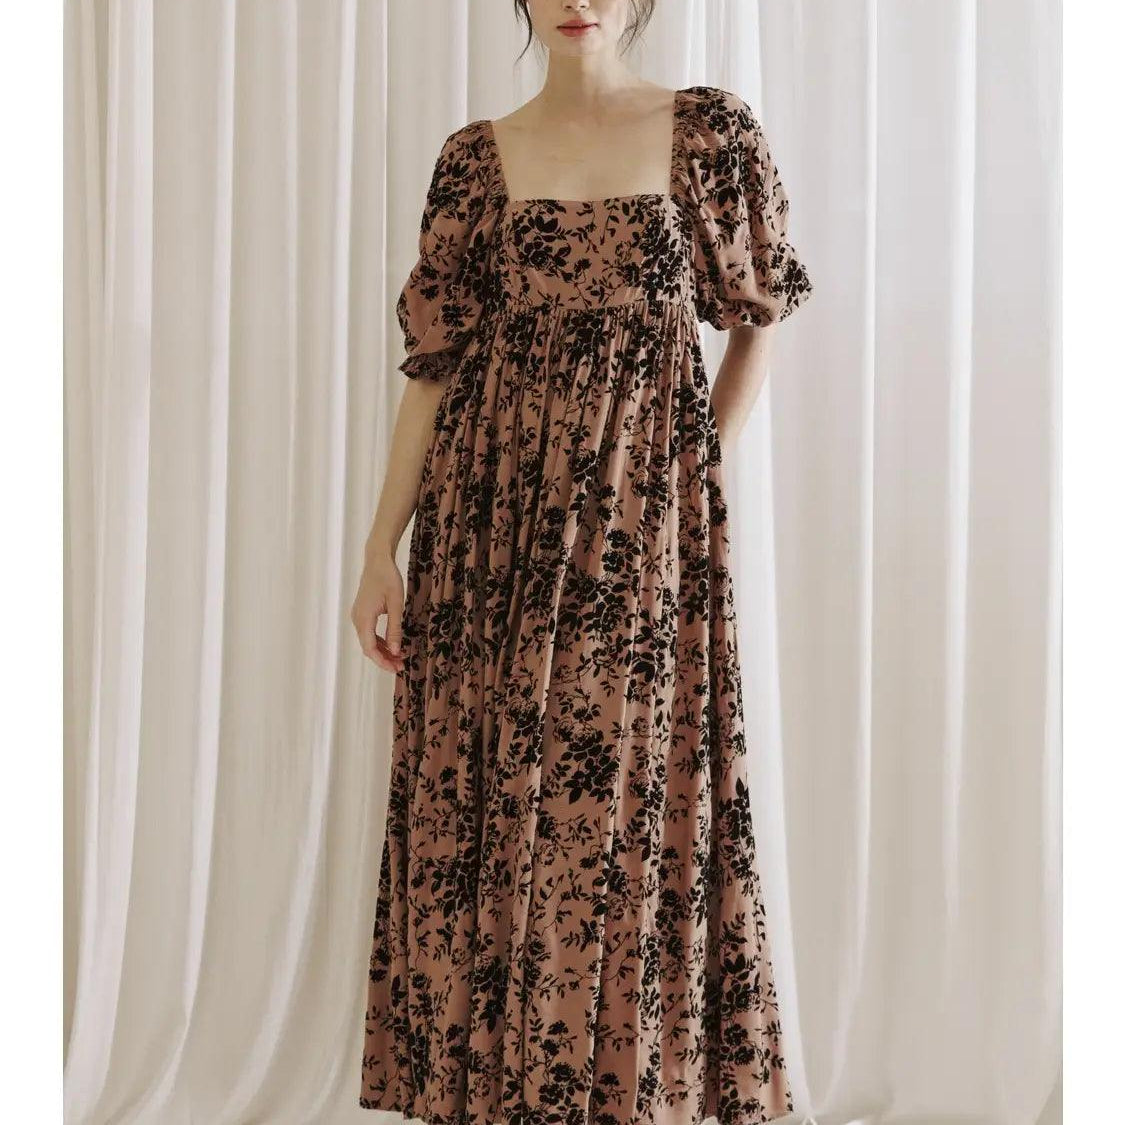 Black and Brown Floral Maxi Dress - Fox Trot Boutique